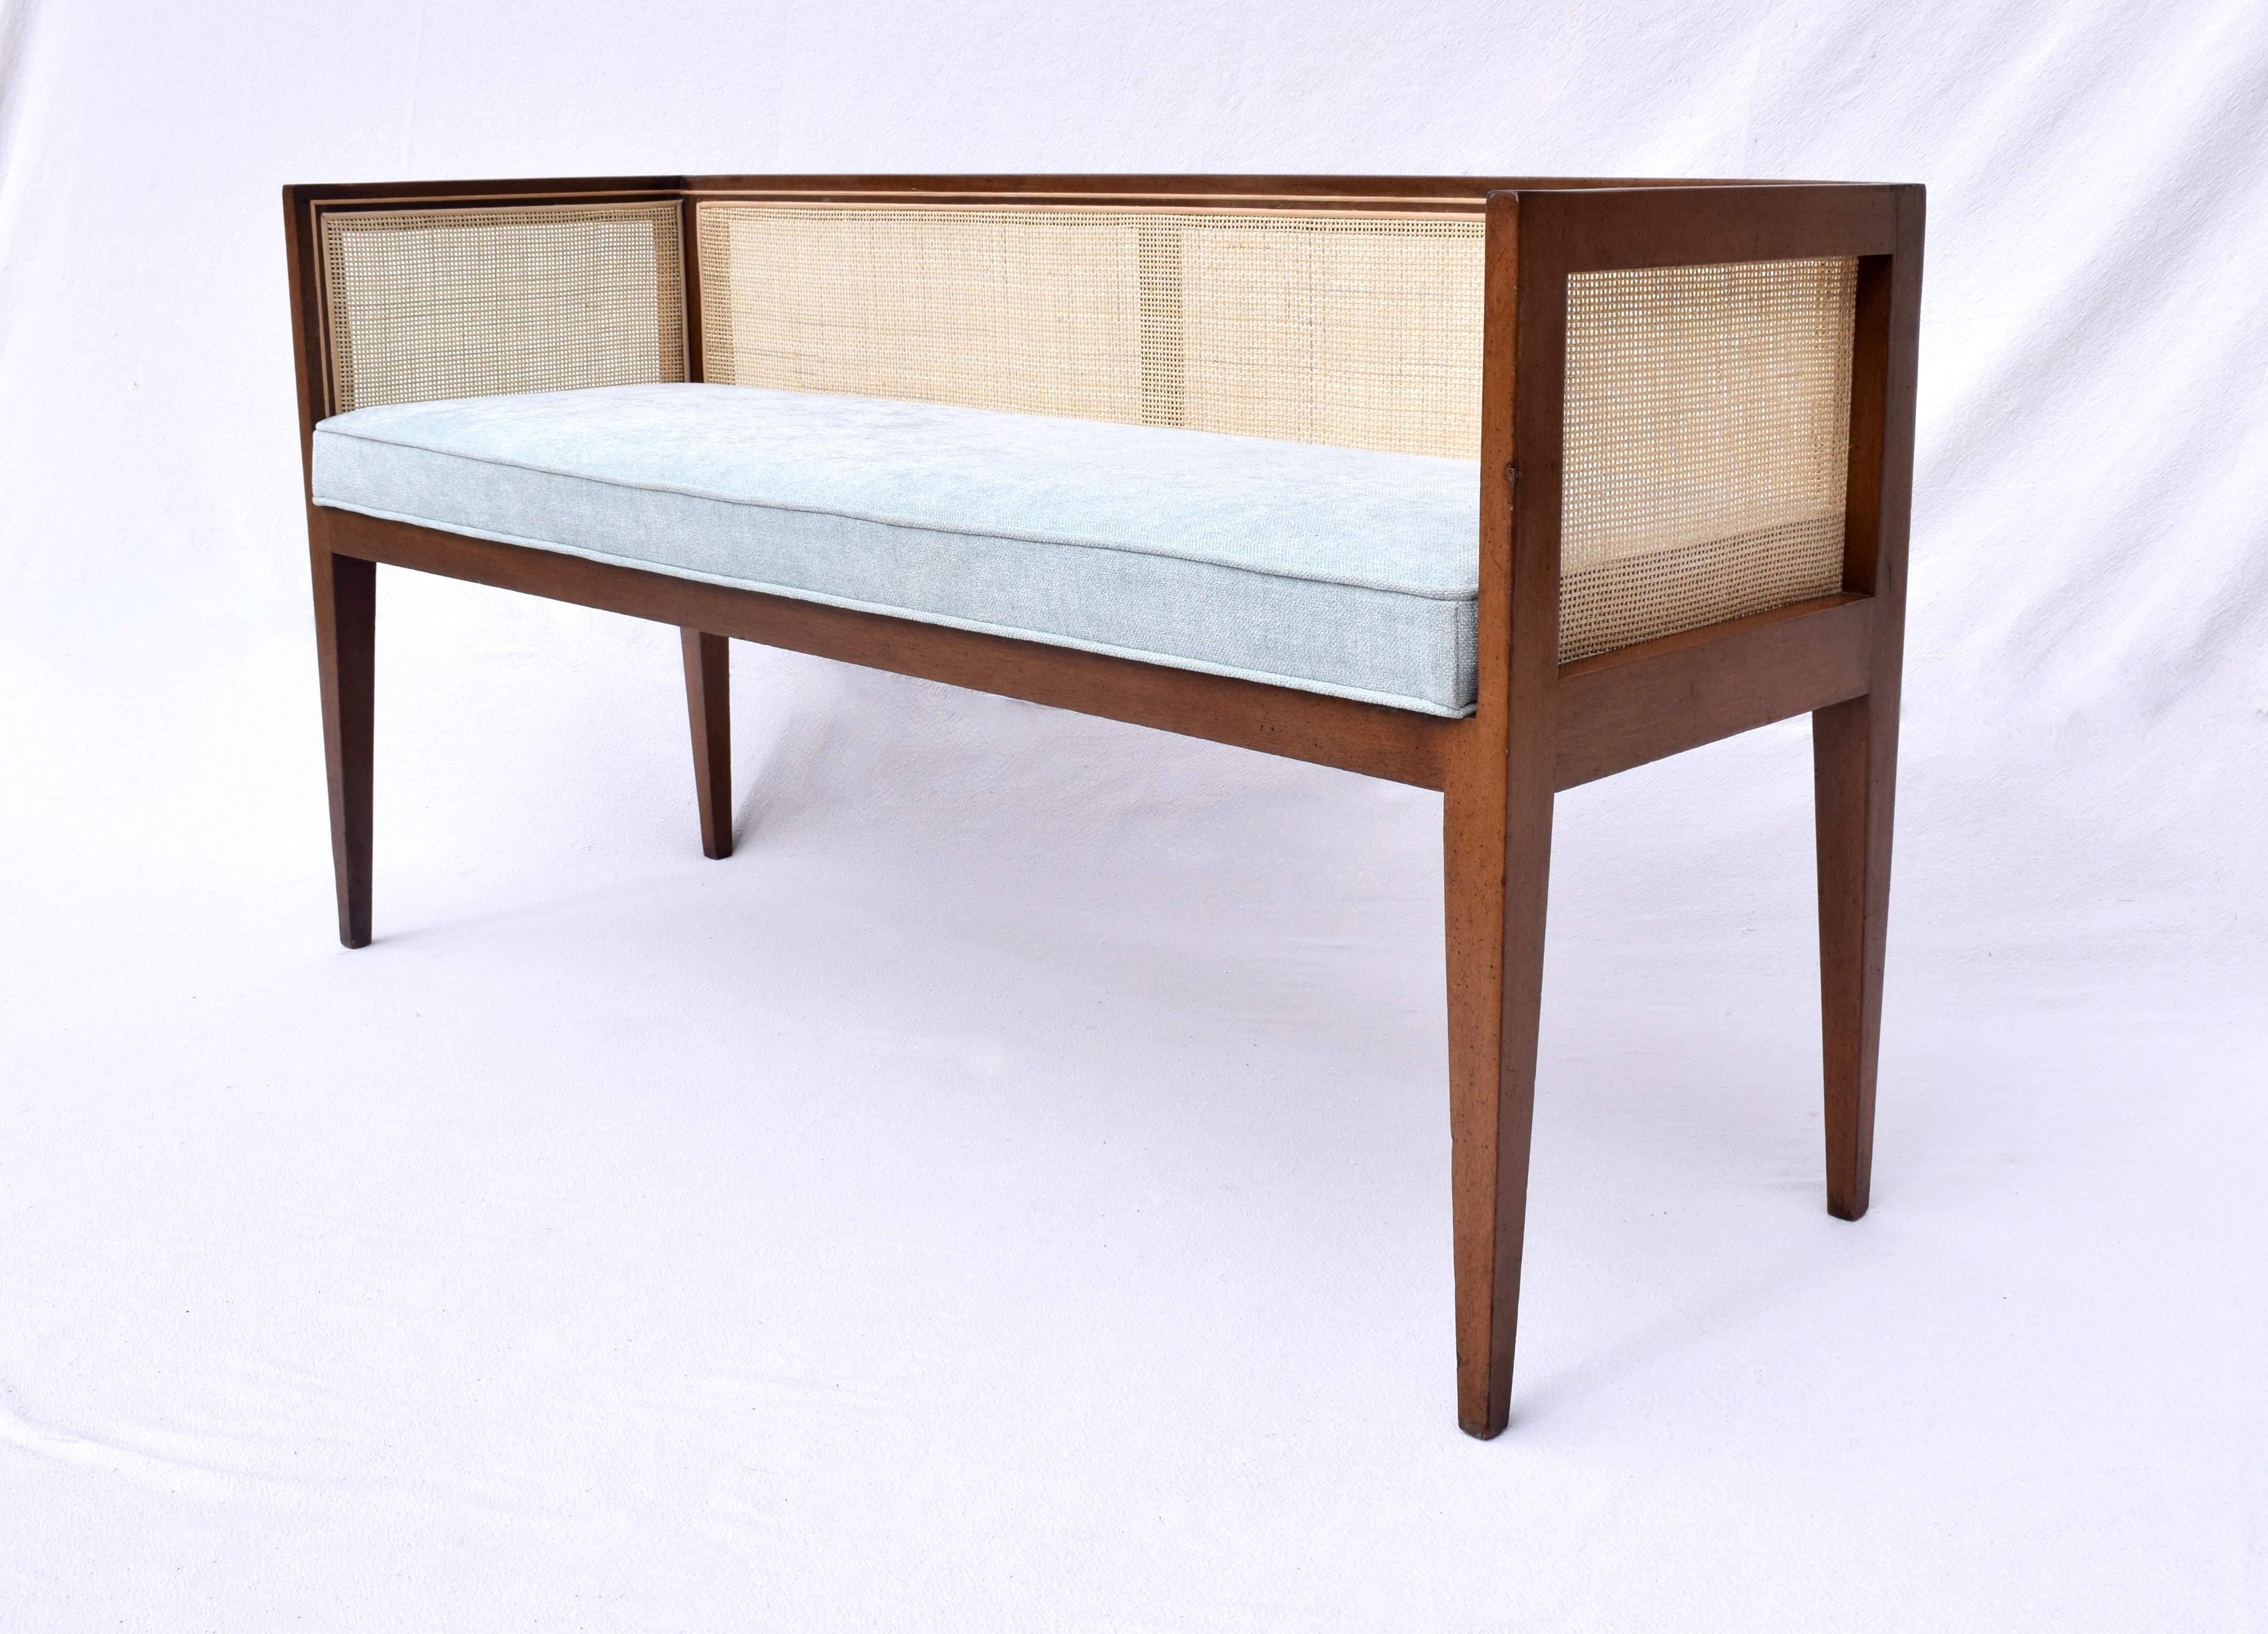 Upholstery 1950s Walnut Window Bench Attributed to Edward Wormley for Dunbar For Sale